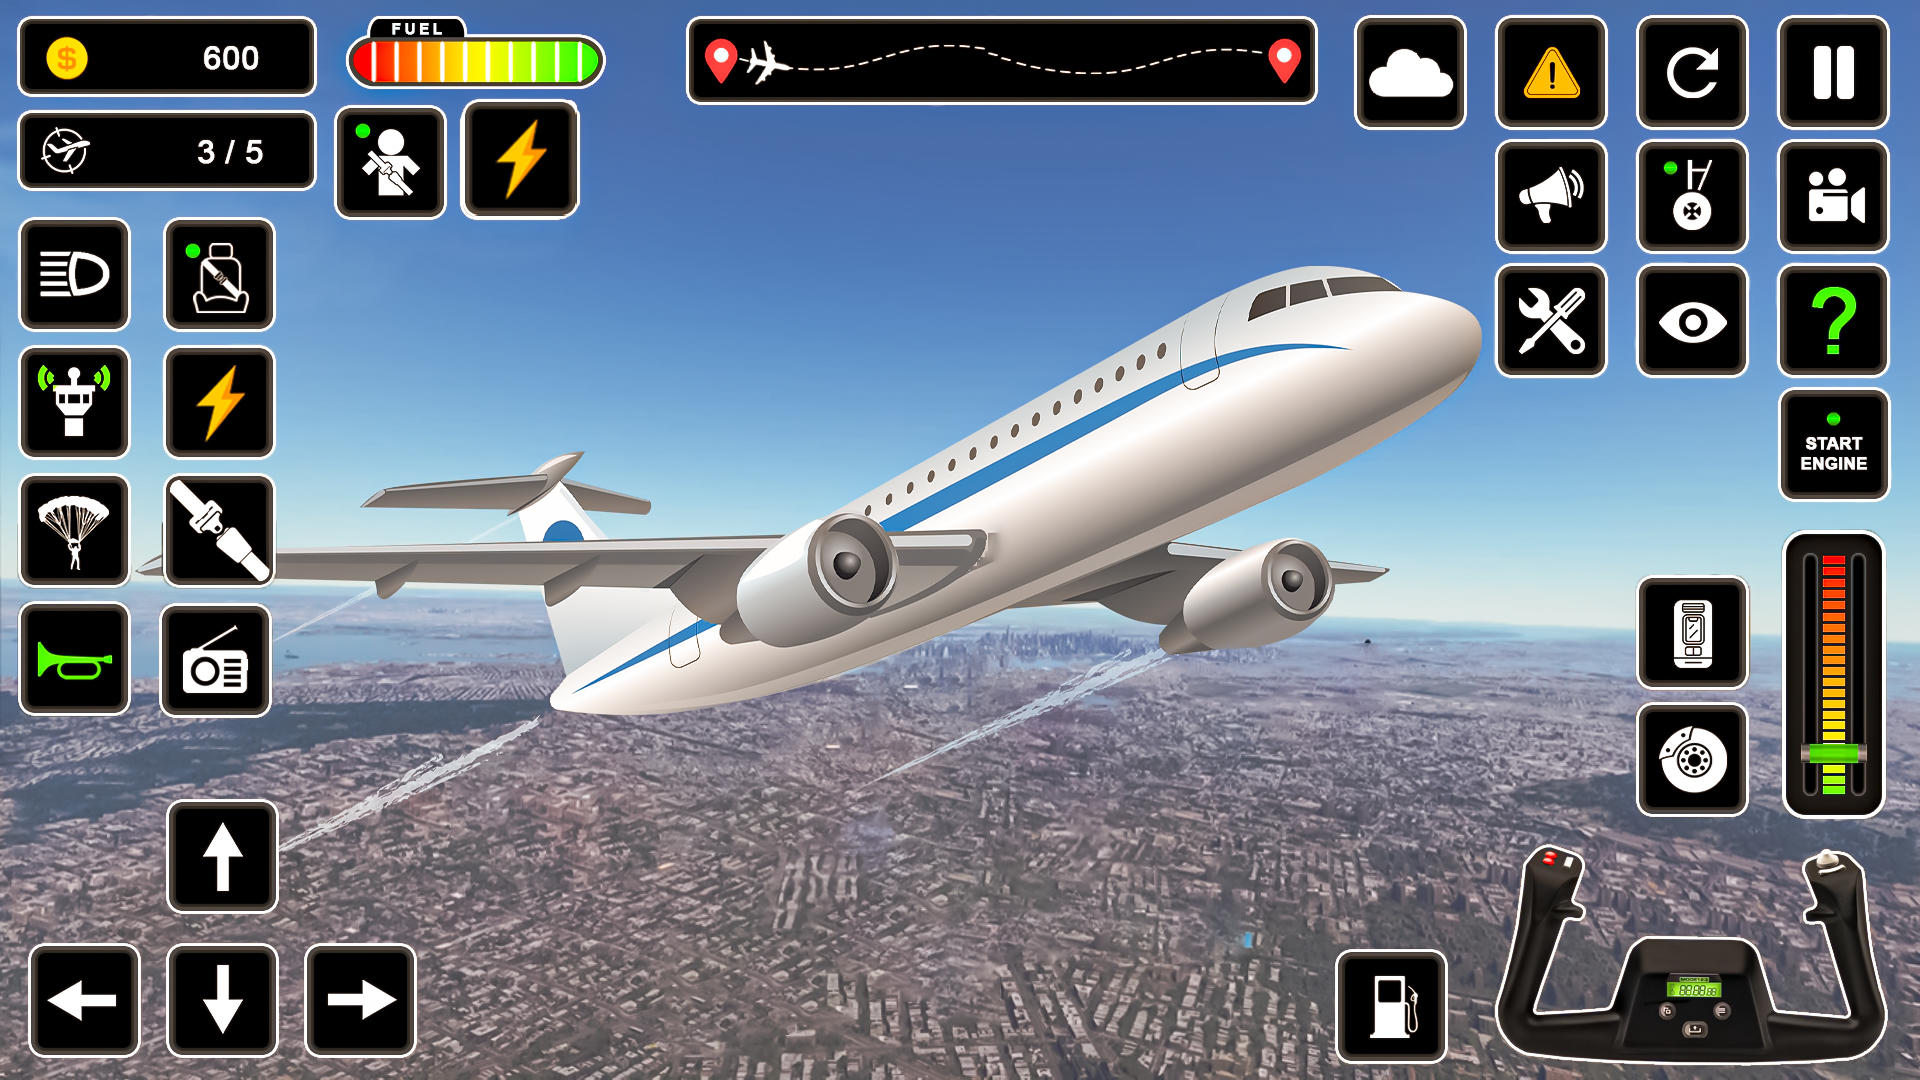 City Flight Airplane Pilot New Game - Plane Games Android Gameplay 